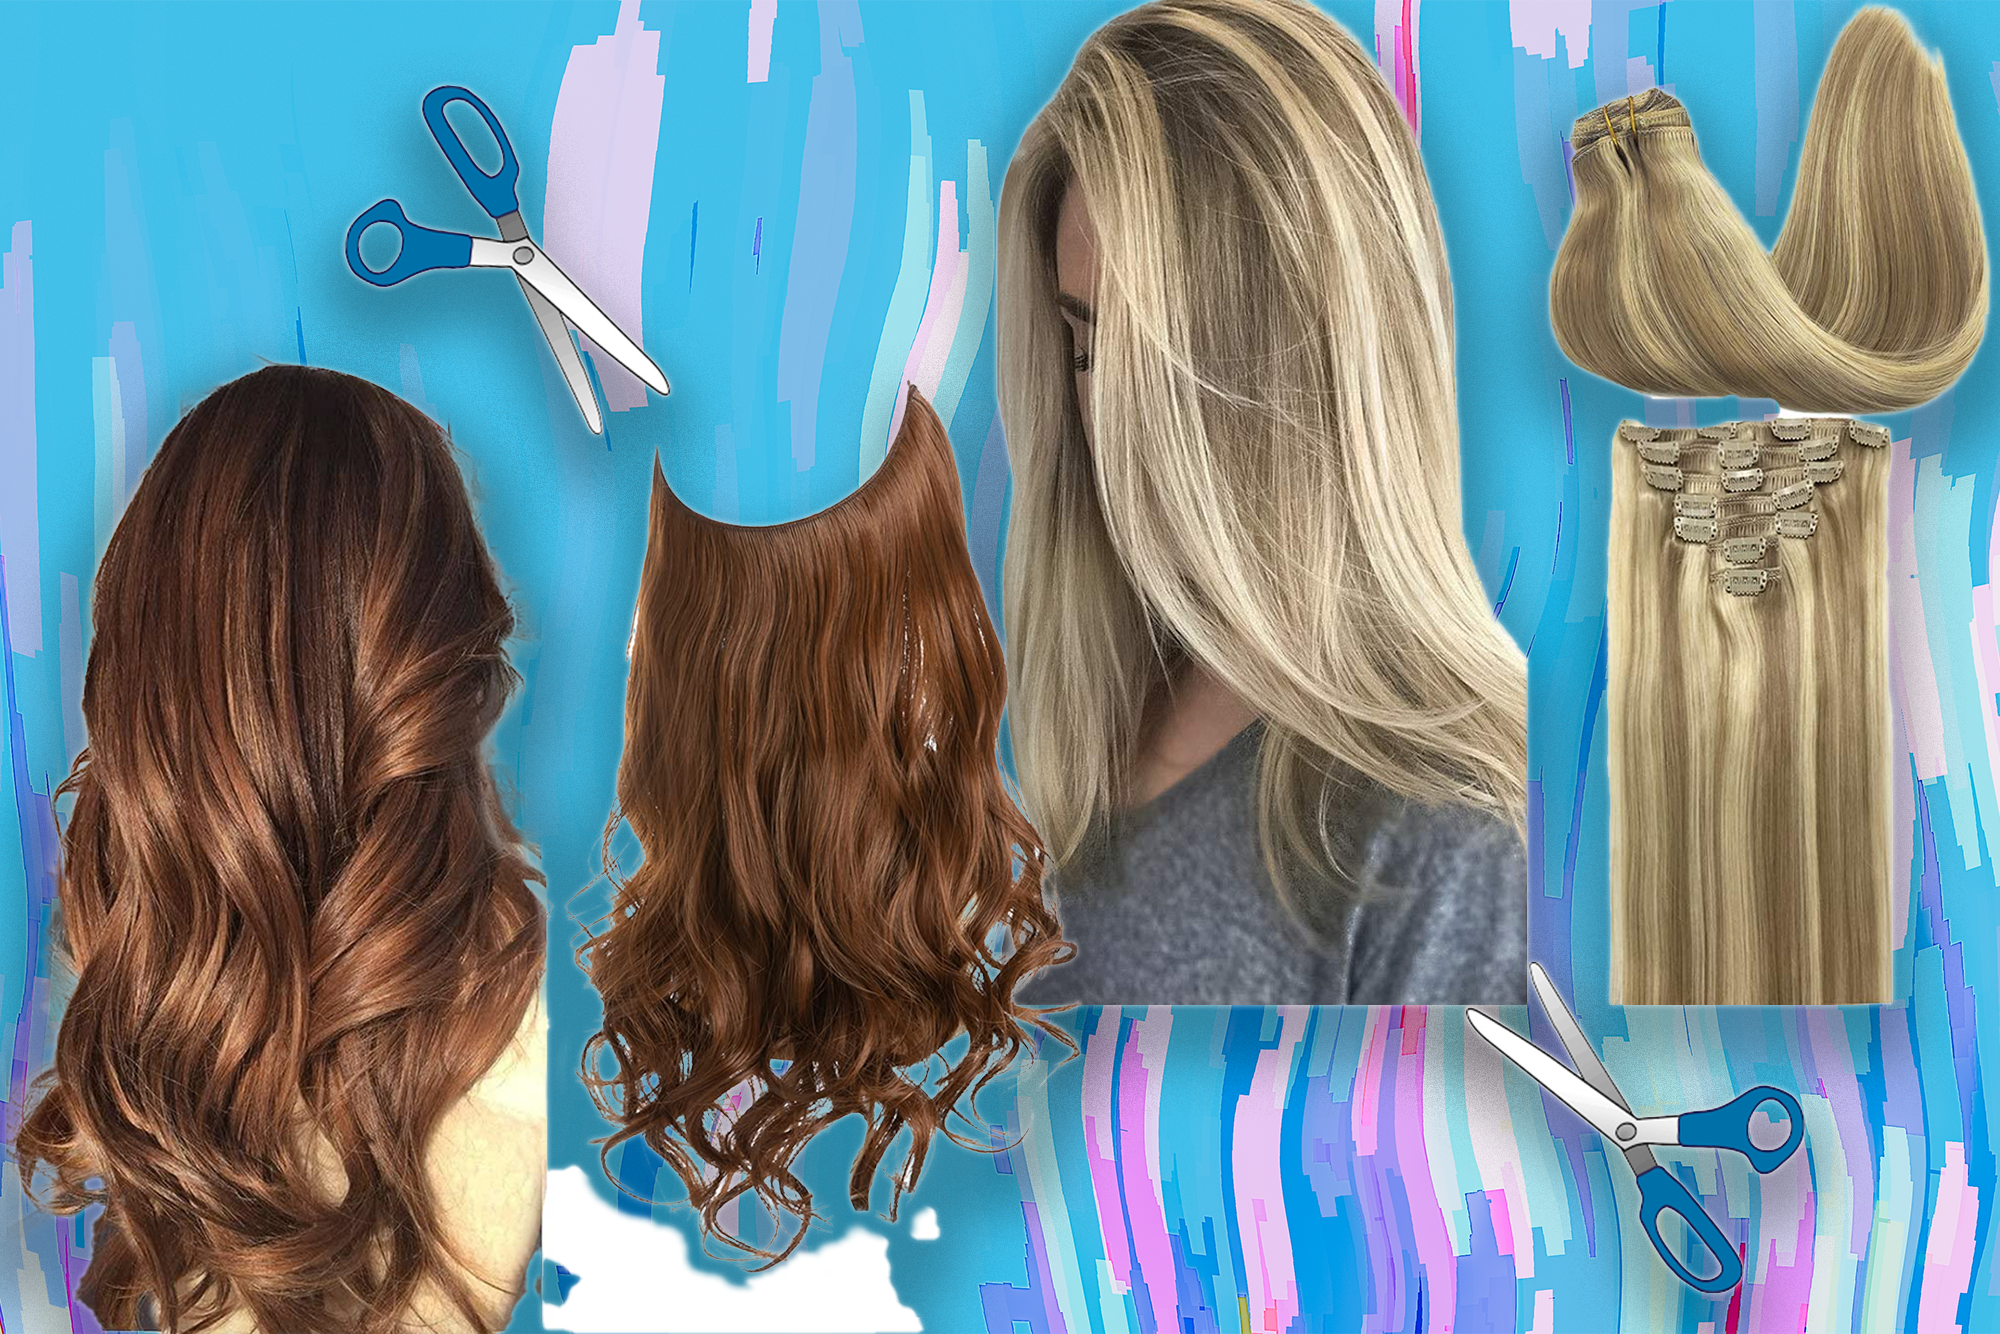  Reasons to Go For Hair Extensions